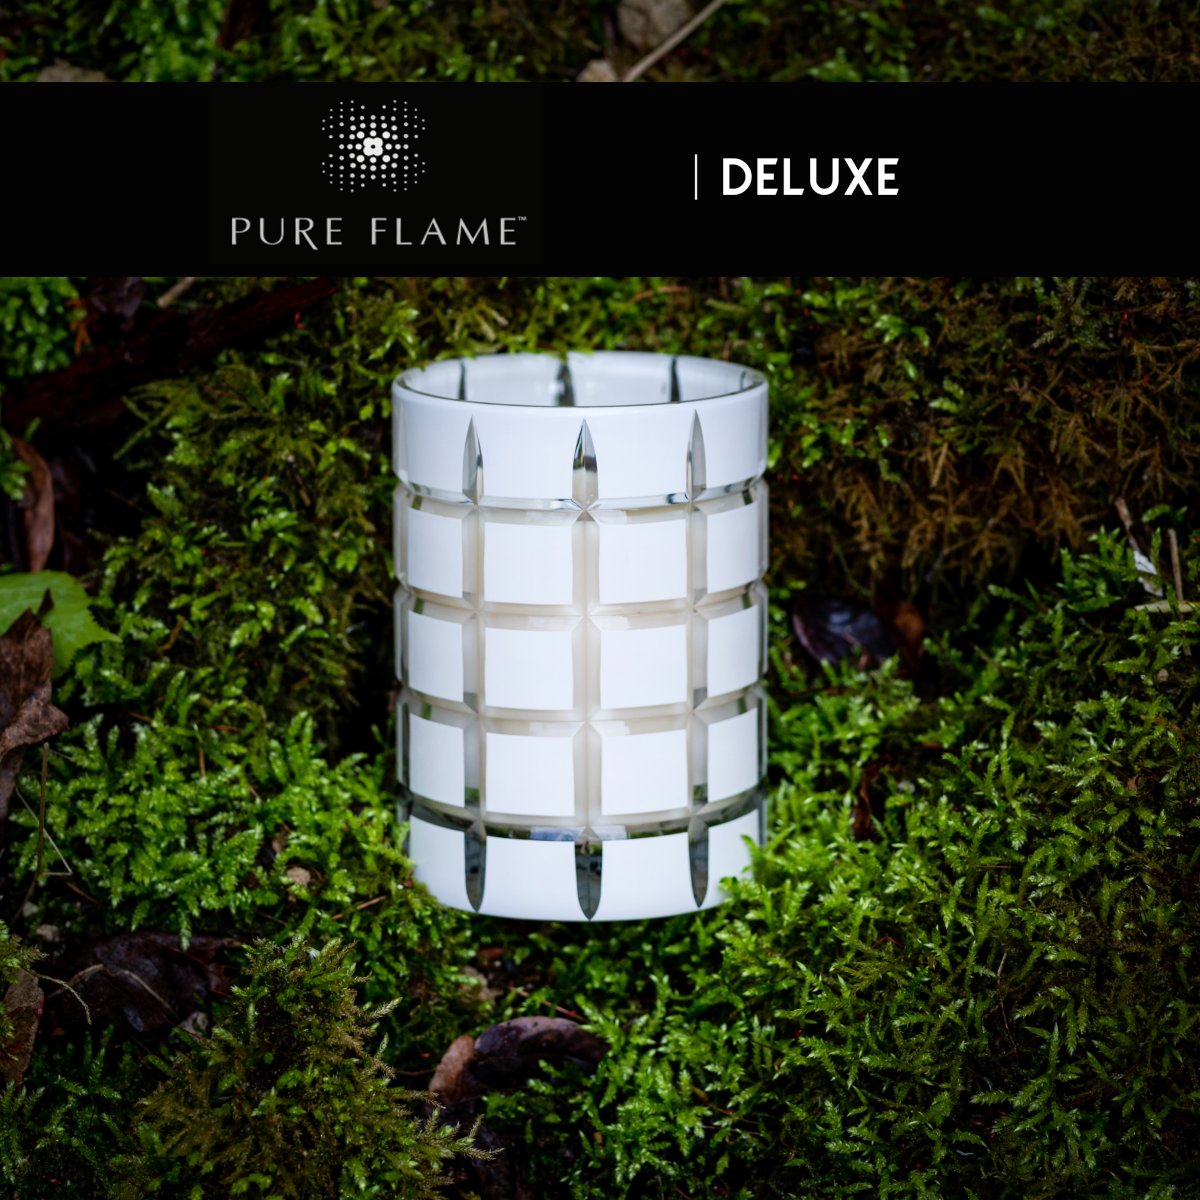 PURE FLAME Deluxe